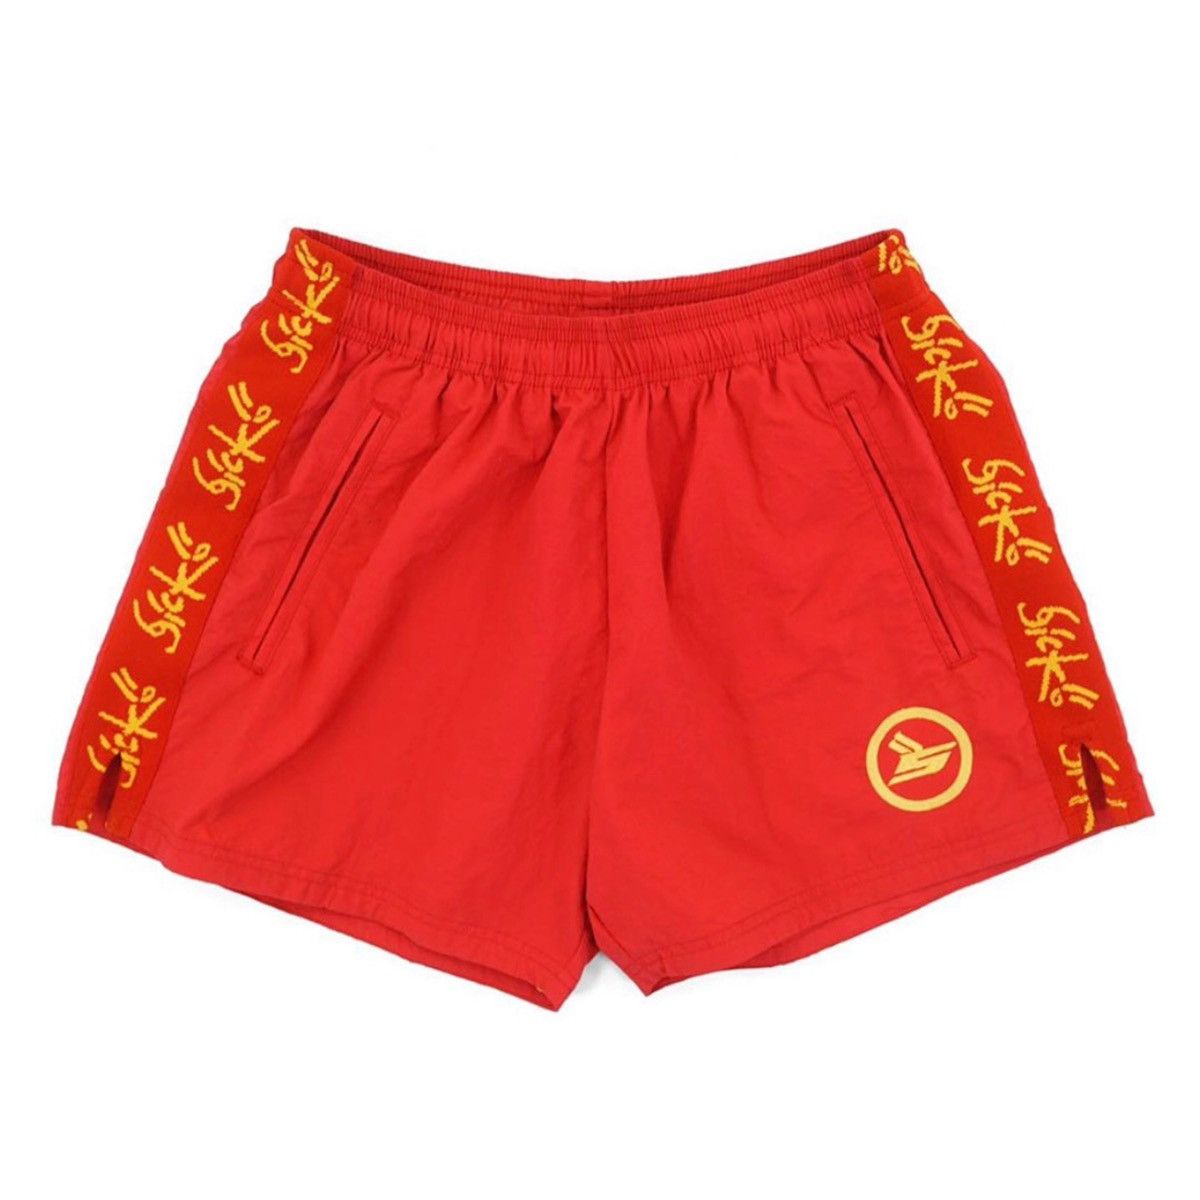 Summer Shorts - Red